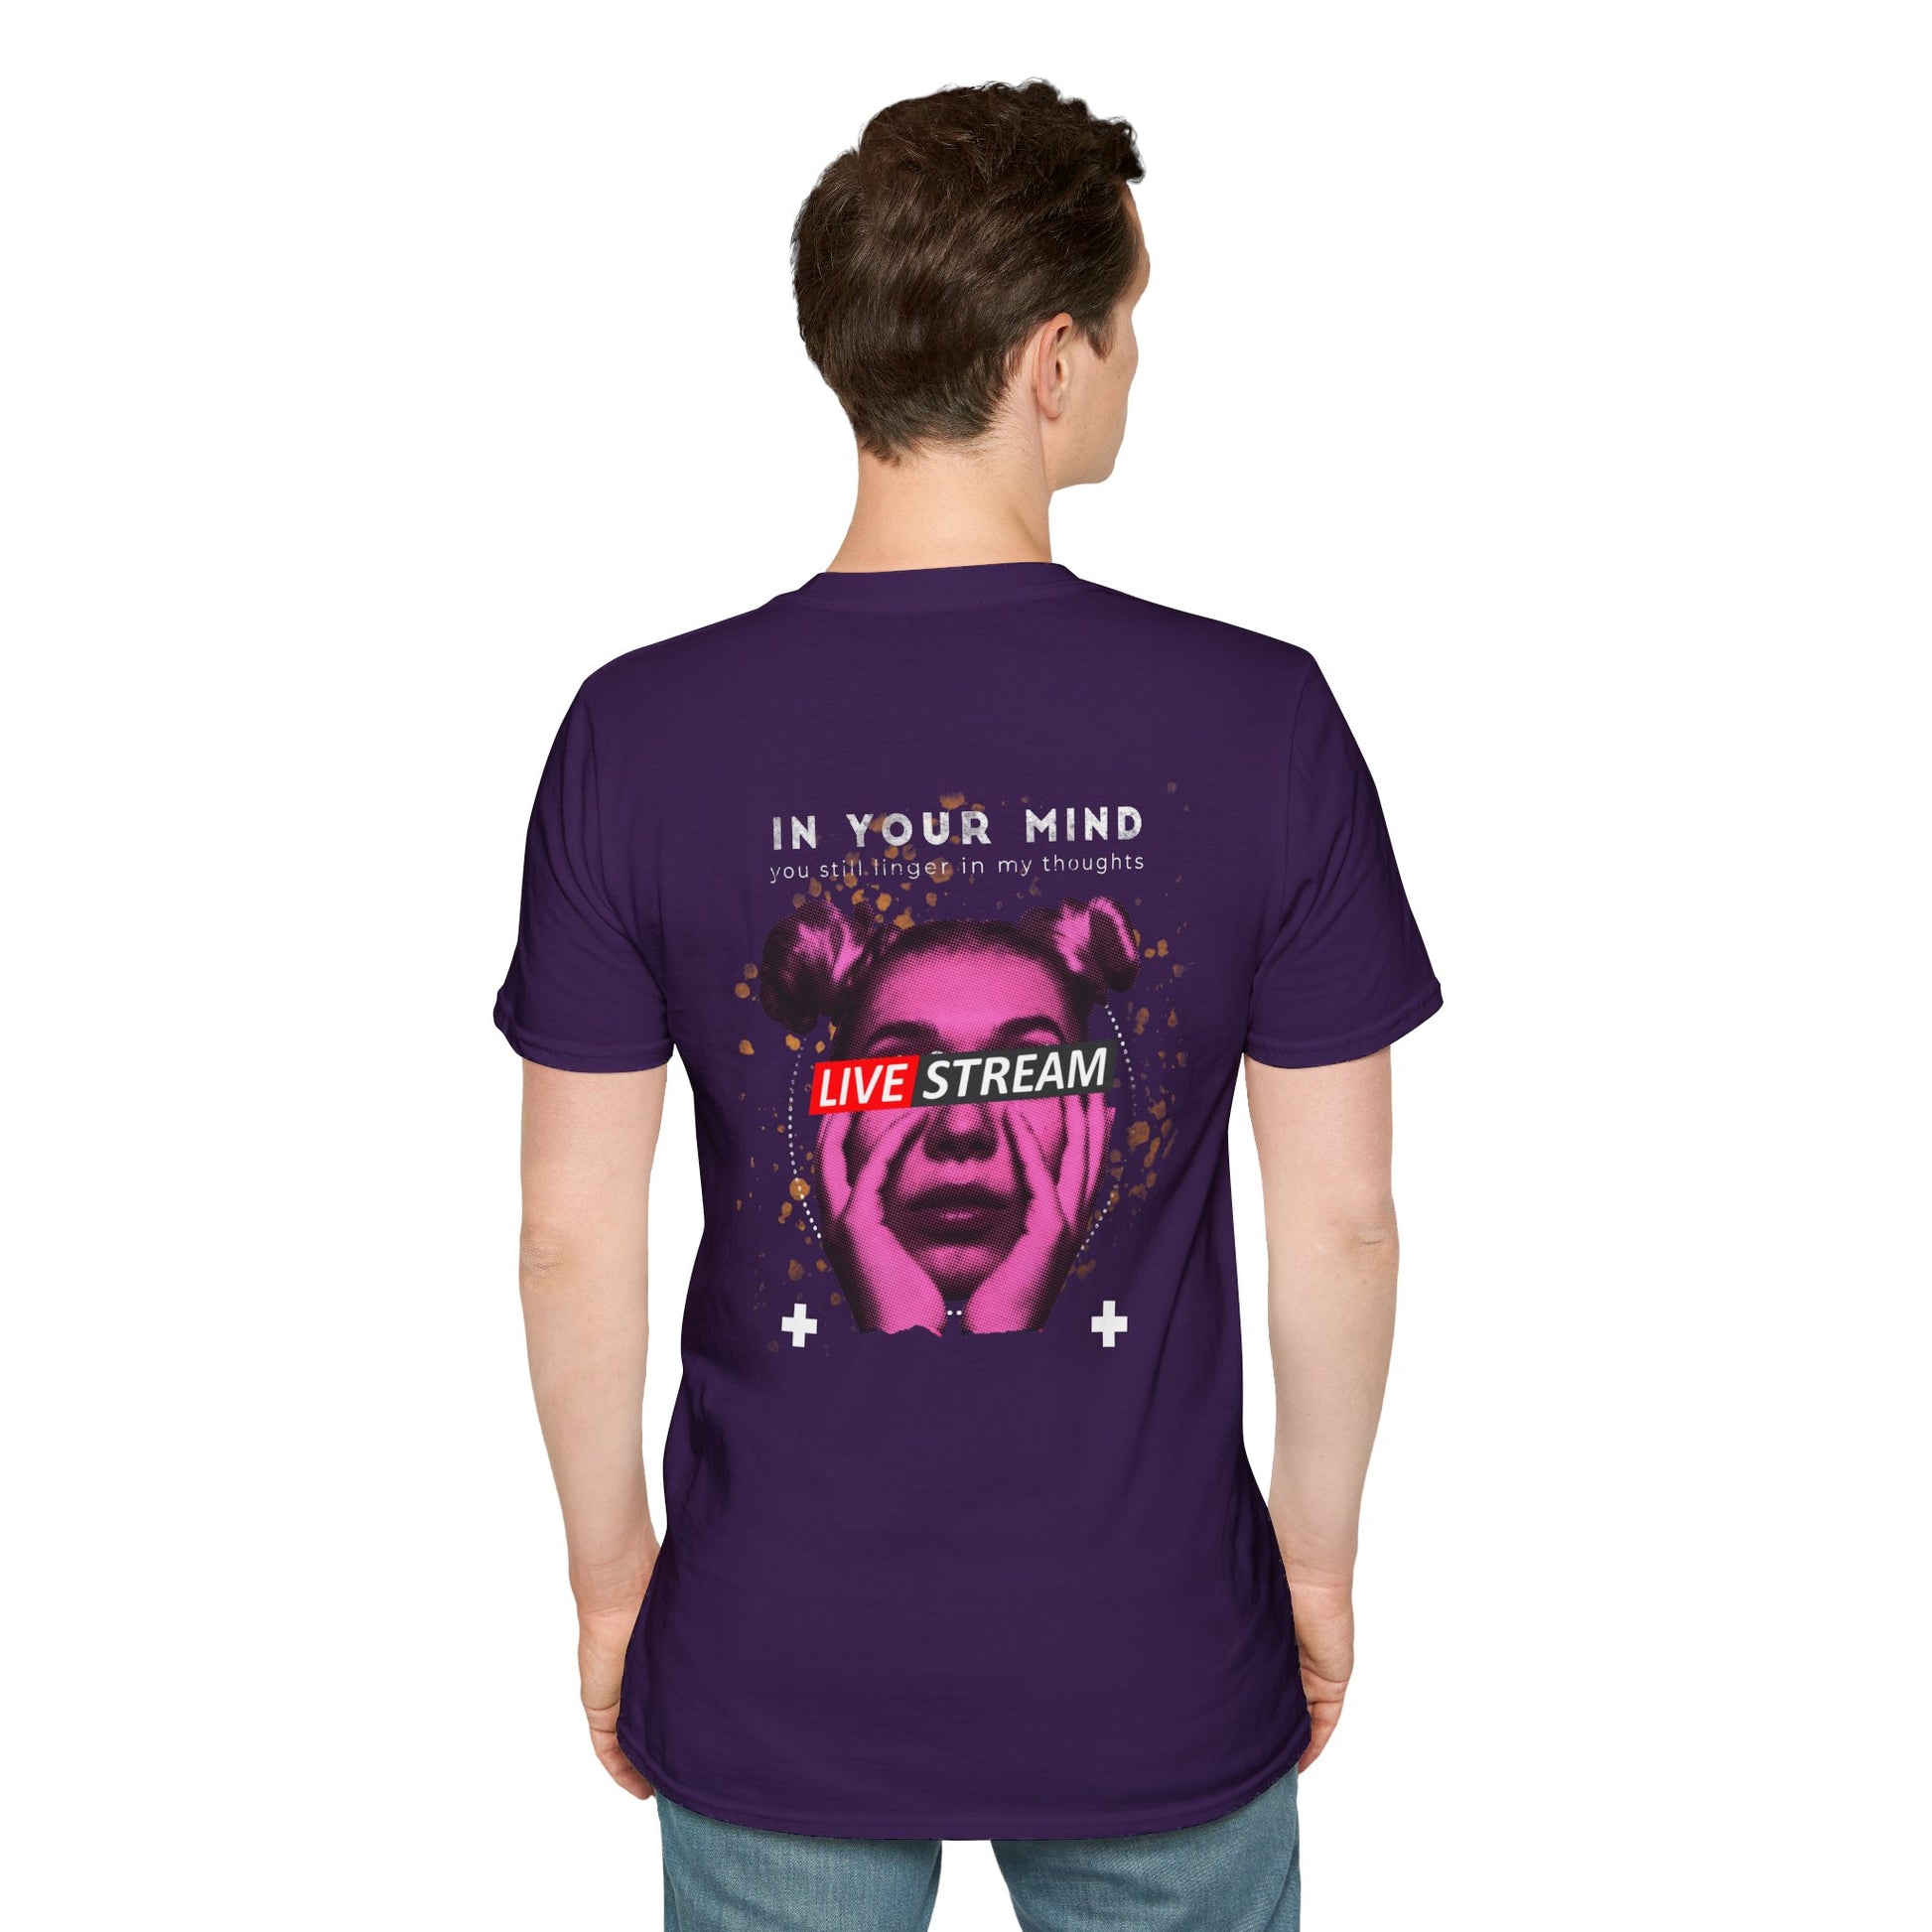 Violet T-shirt with a woman’s face and the phrase ‘live stream’ in white text across her palms